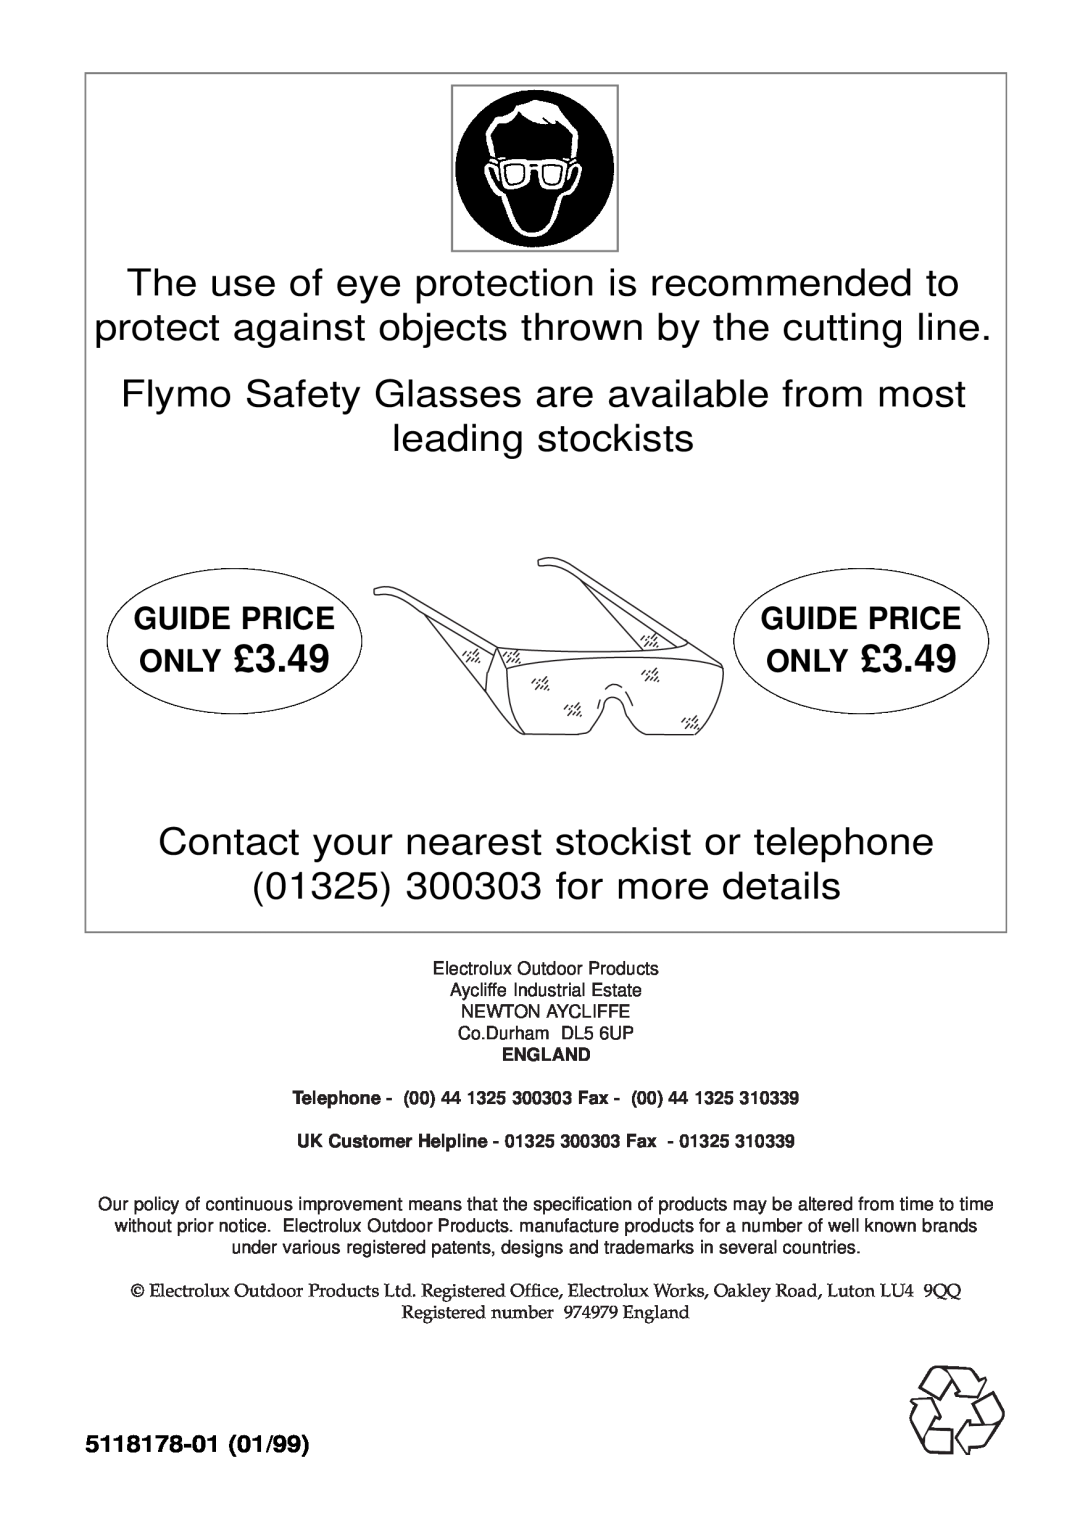 Flymo Trimmer I 5118178-0101/99, Flymo Safety Glasses are available from most, leading stockists, Guide Price, ONLY £3.49 